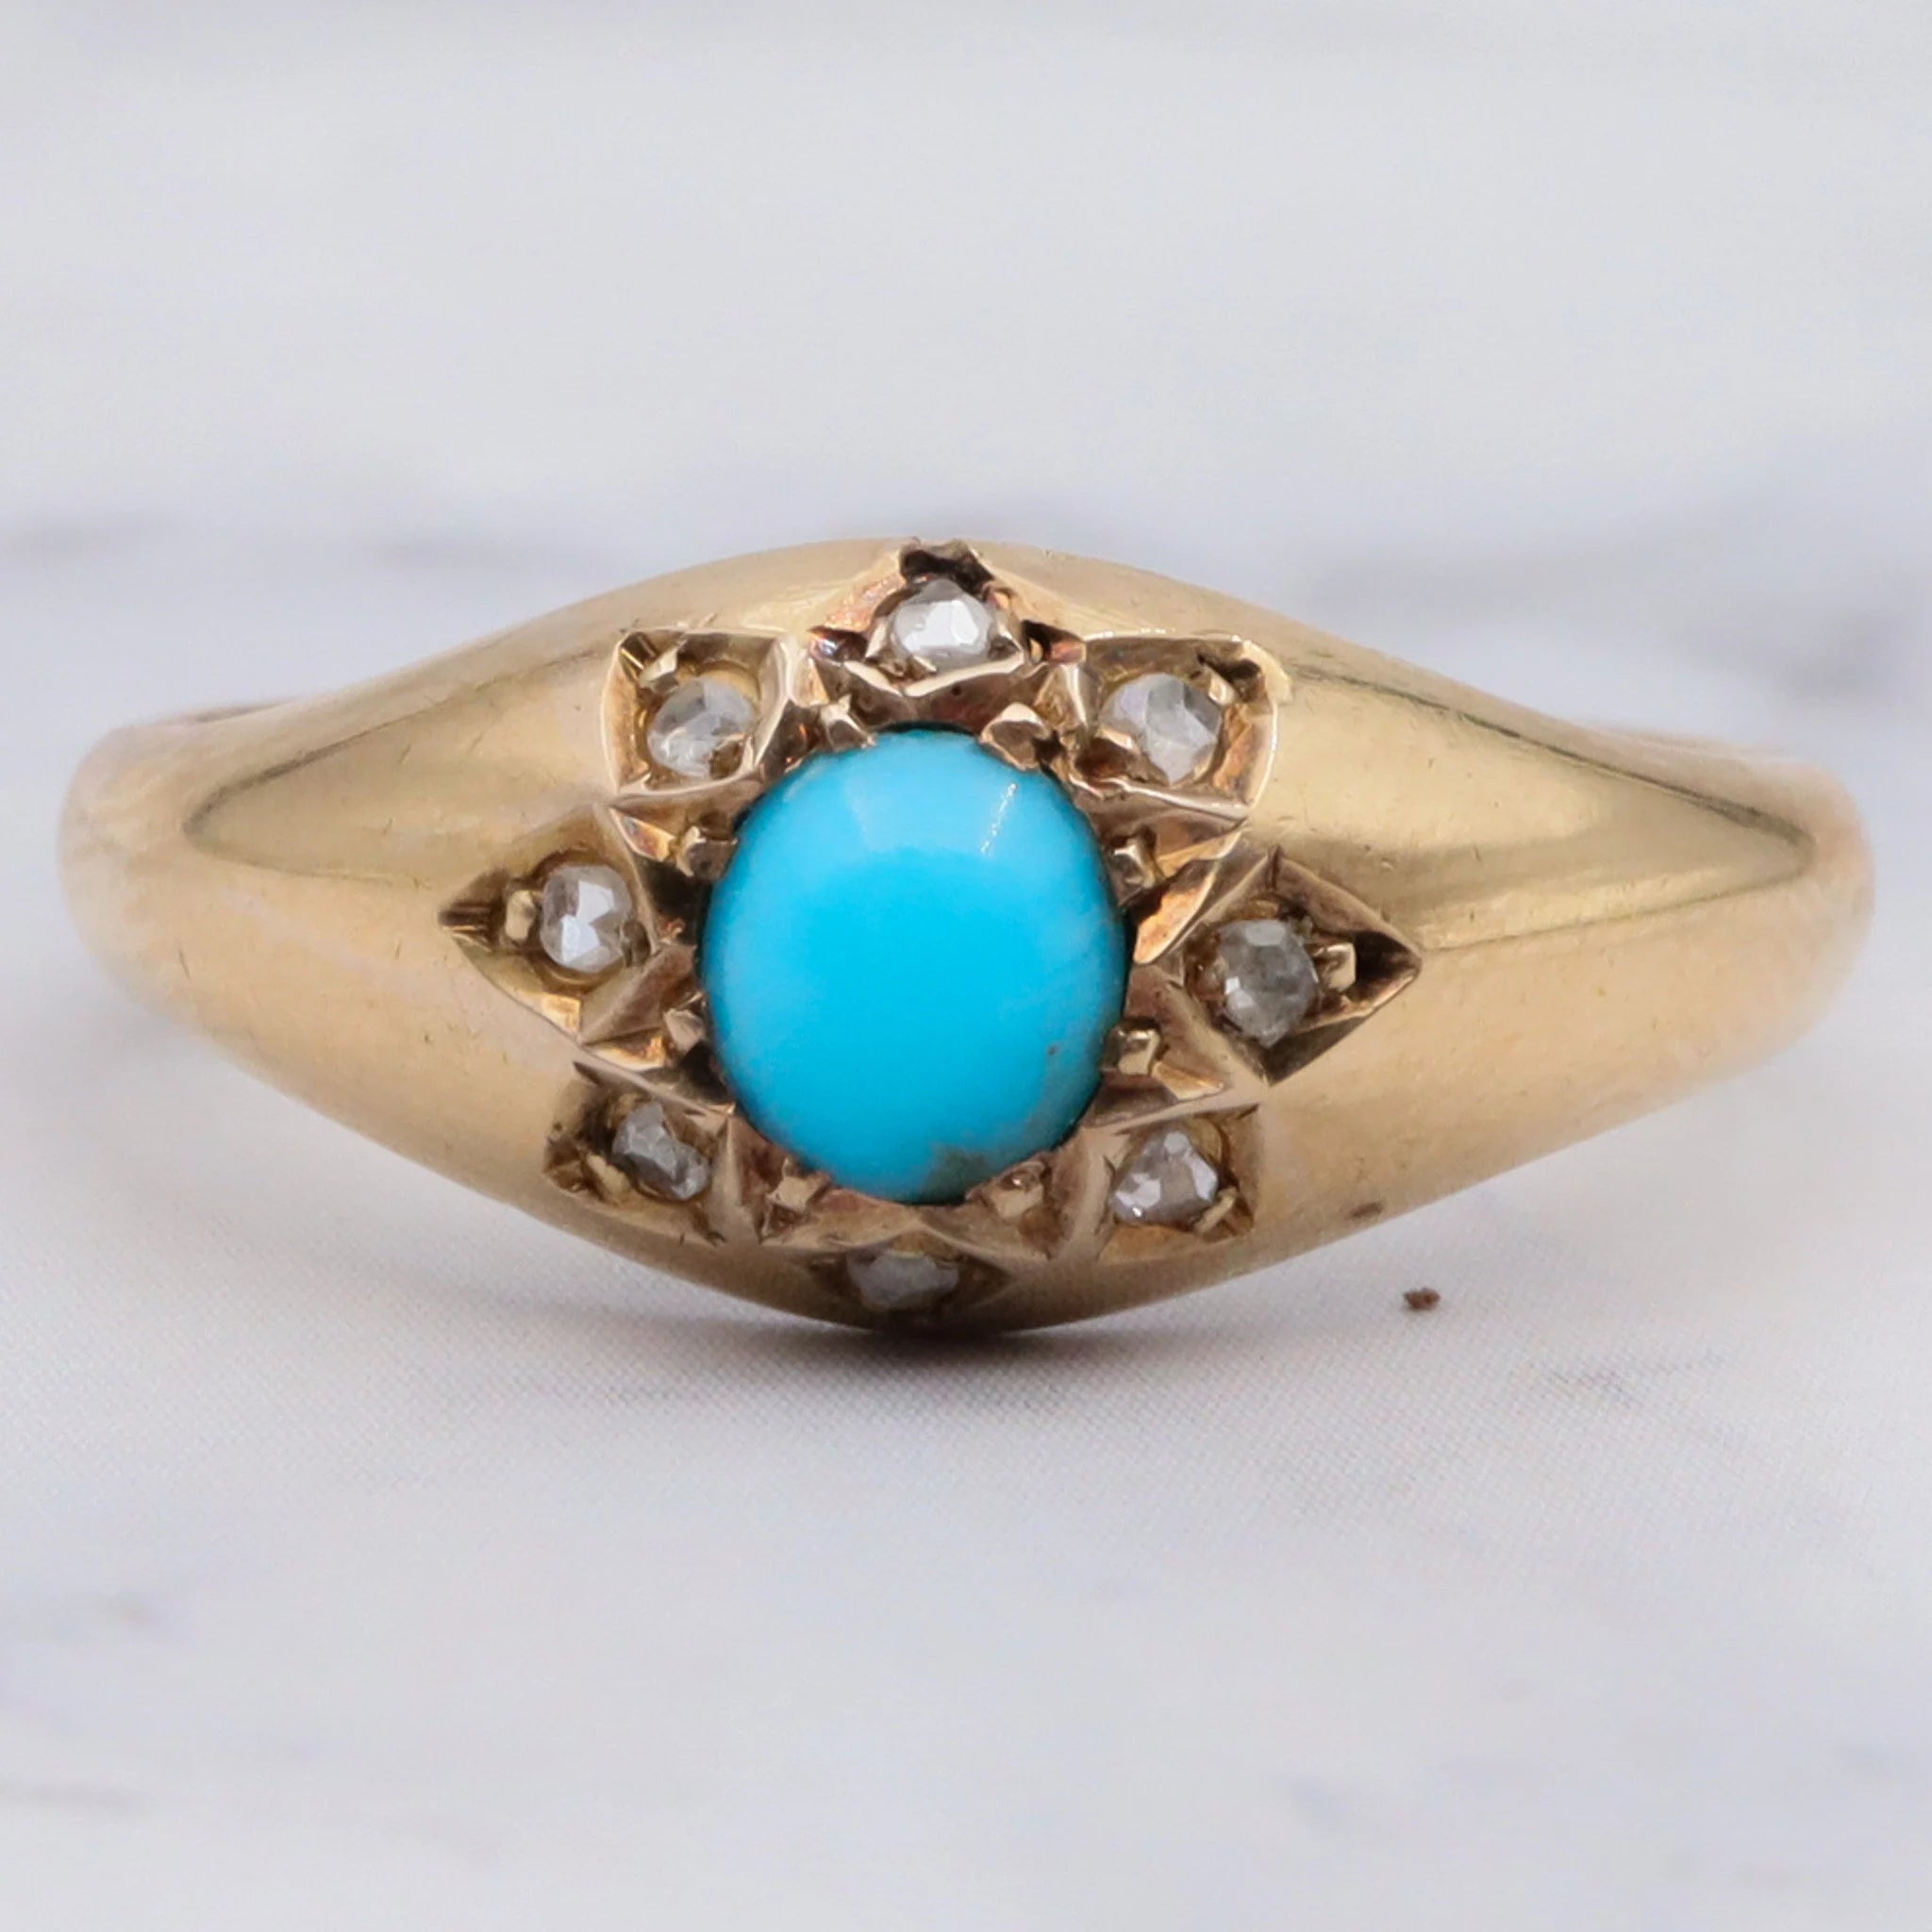 Antique Victorian 18K Gold Turquoise with Rose Cut Diamond Ring - Size 5